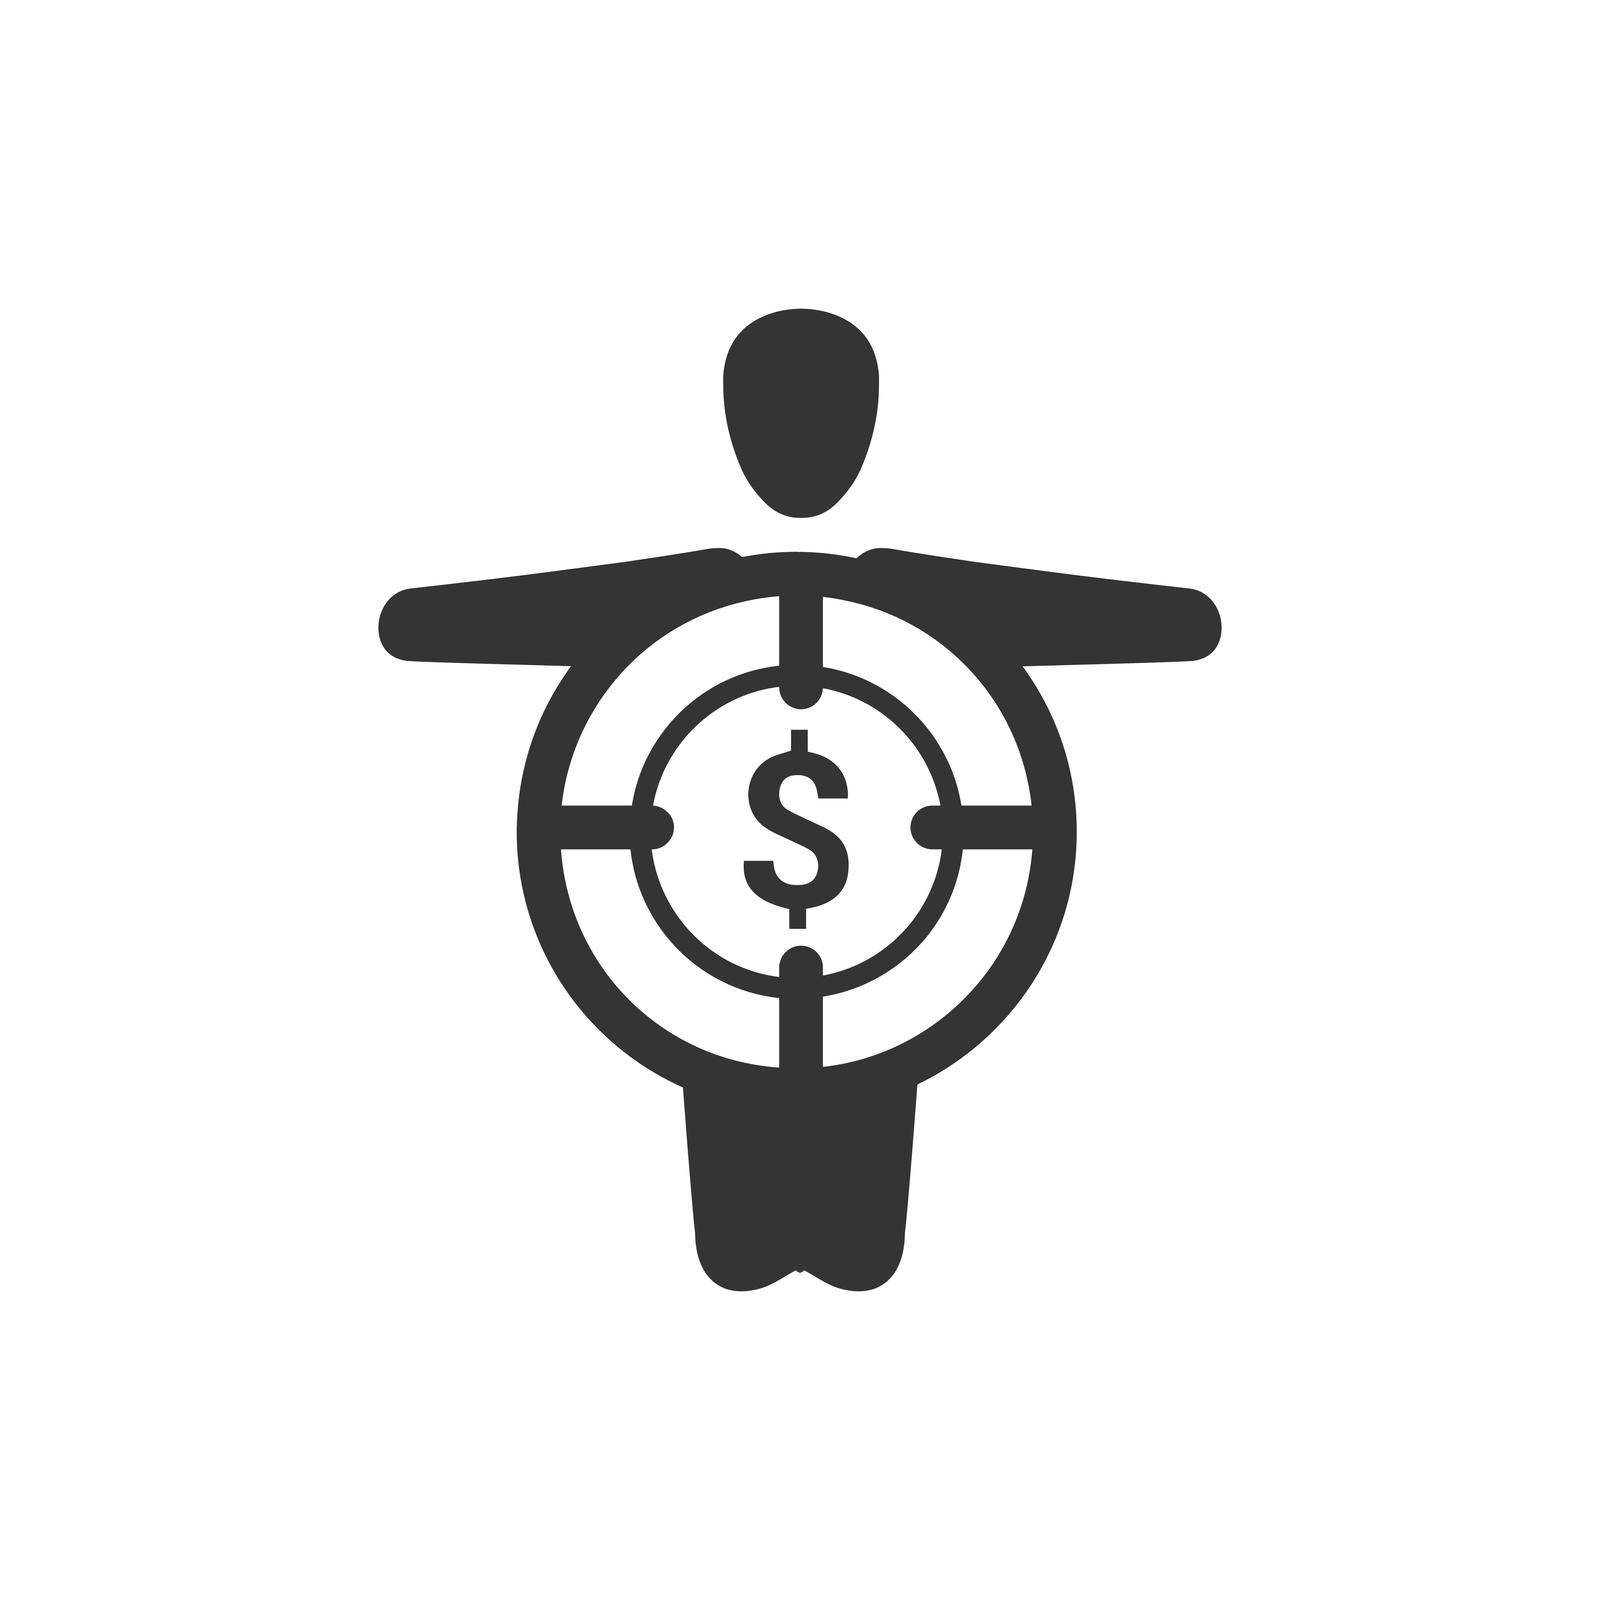 Financial target icon. Vector EPS file.